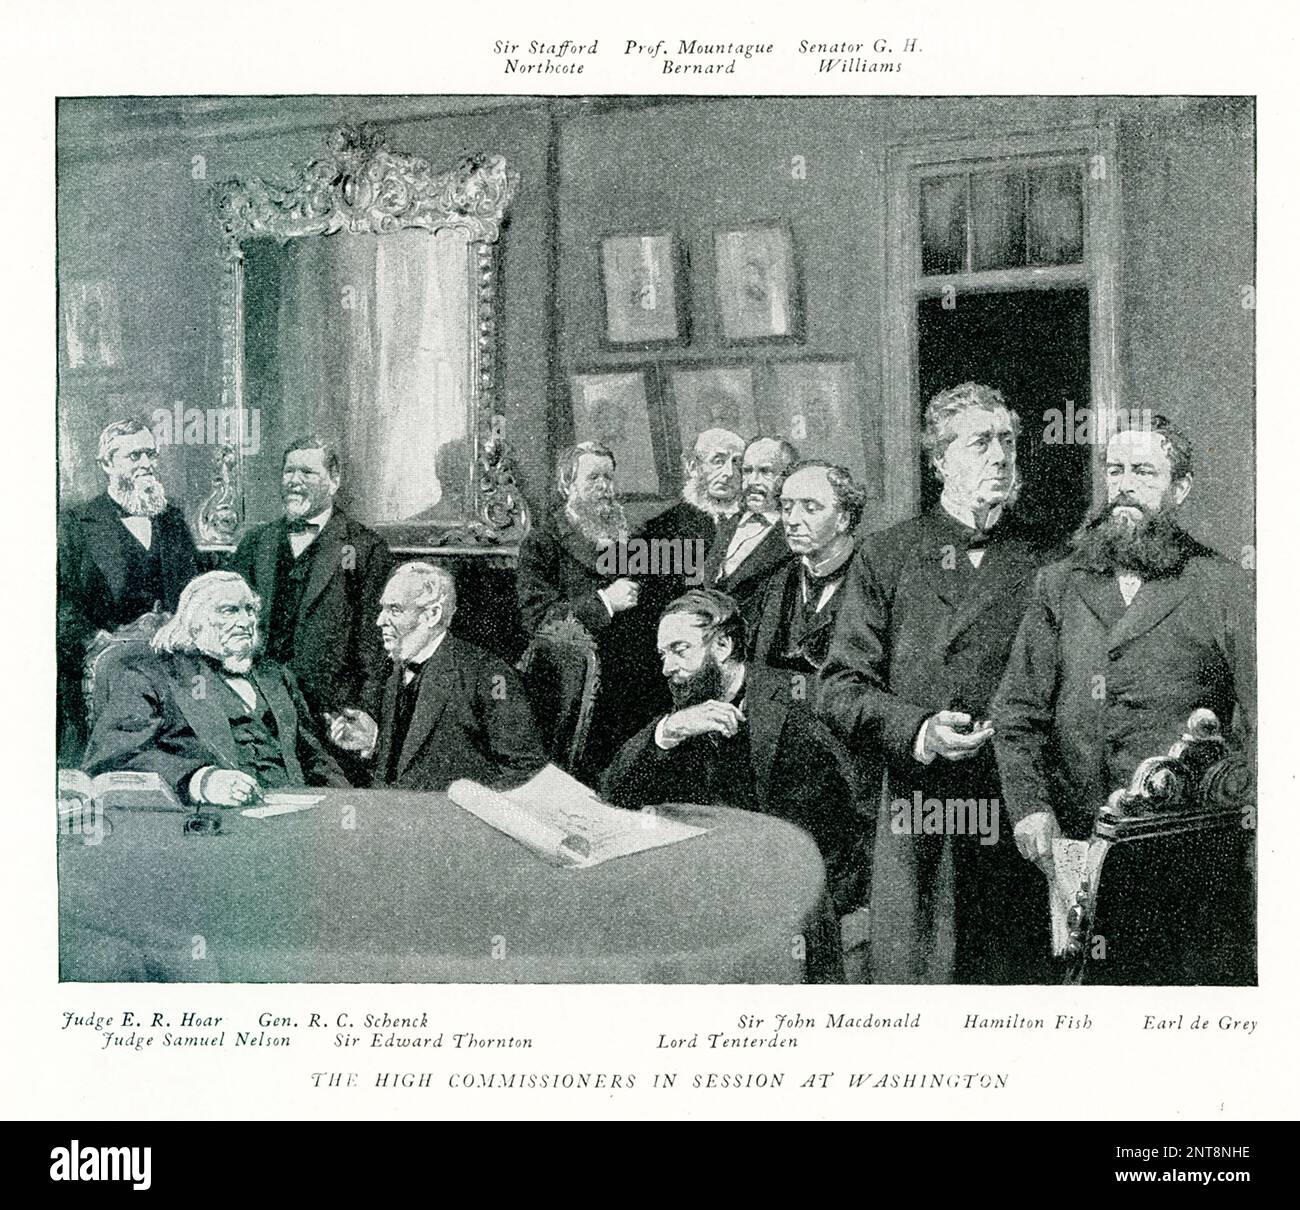 The 1896 caption reads: High Commissioners in Session at Washington. [The figures in back are: Sir Stafford Northcote, Professor Mountague Bernard, Senator G h Williams. The figures in front, are, from left to right: Judge ER Hoar, Gen RC Schenck, Sir John MacDonald, Hamilton Fish, Earl de Grey, Judge Samuel Nelson, Sir Edward Thronton, Lord Tenterden Stock Photo